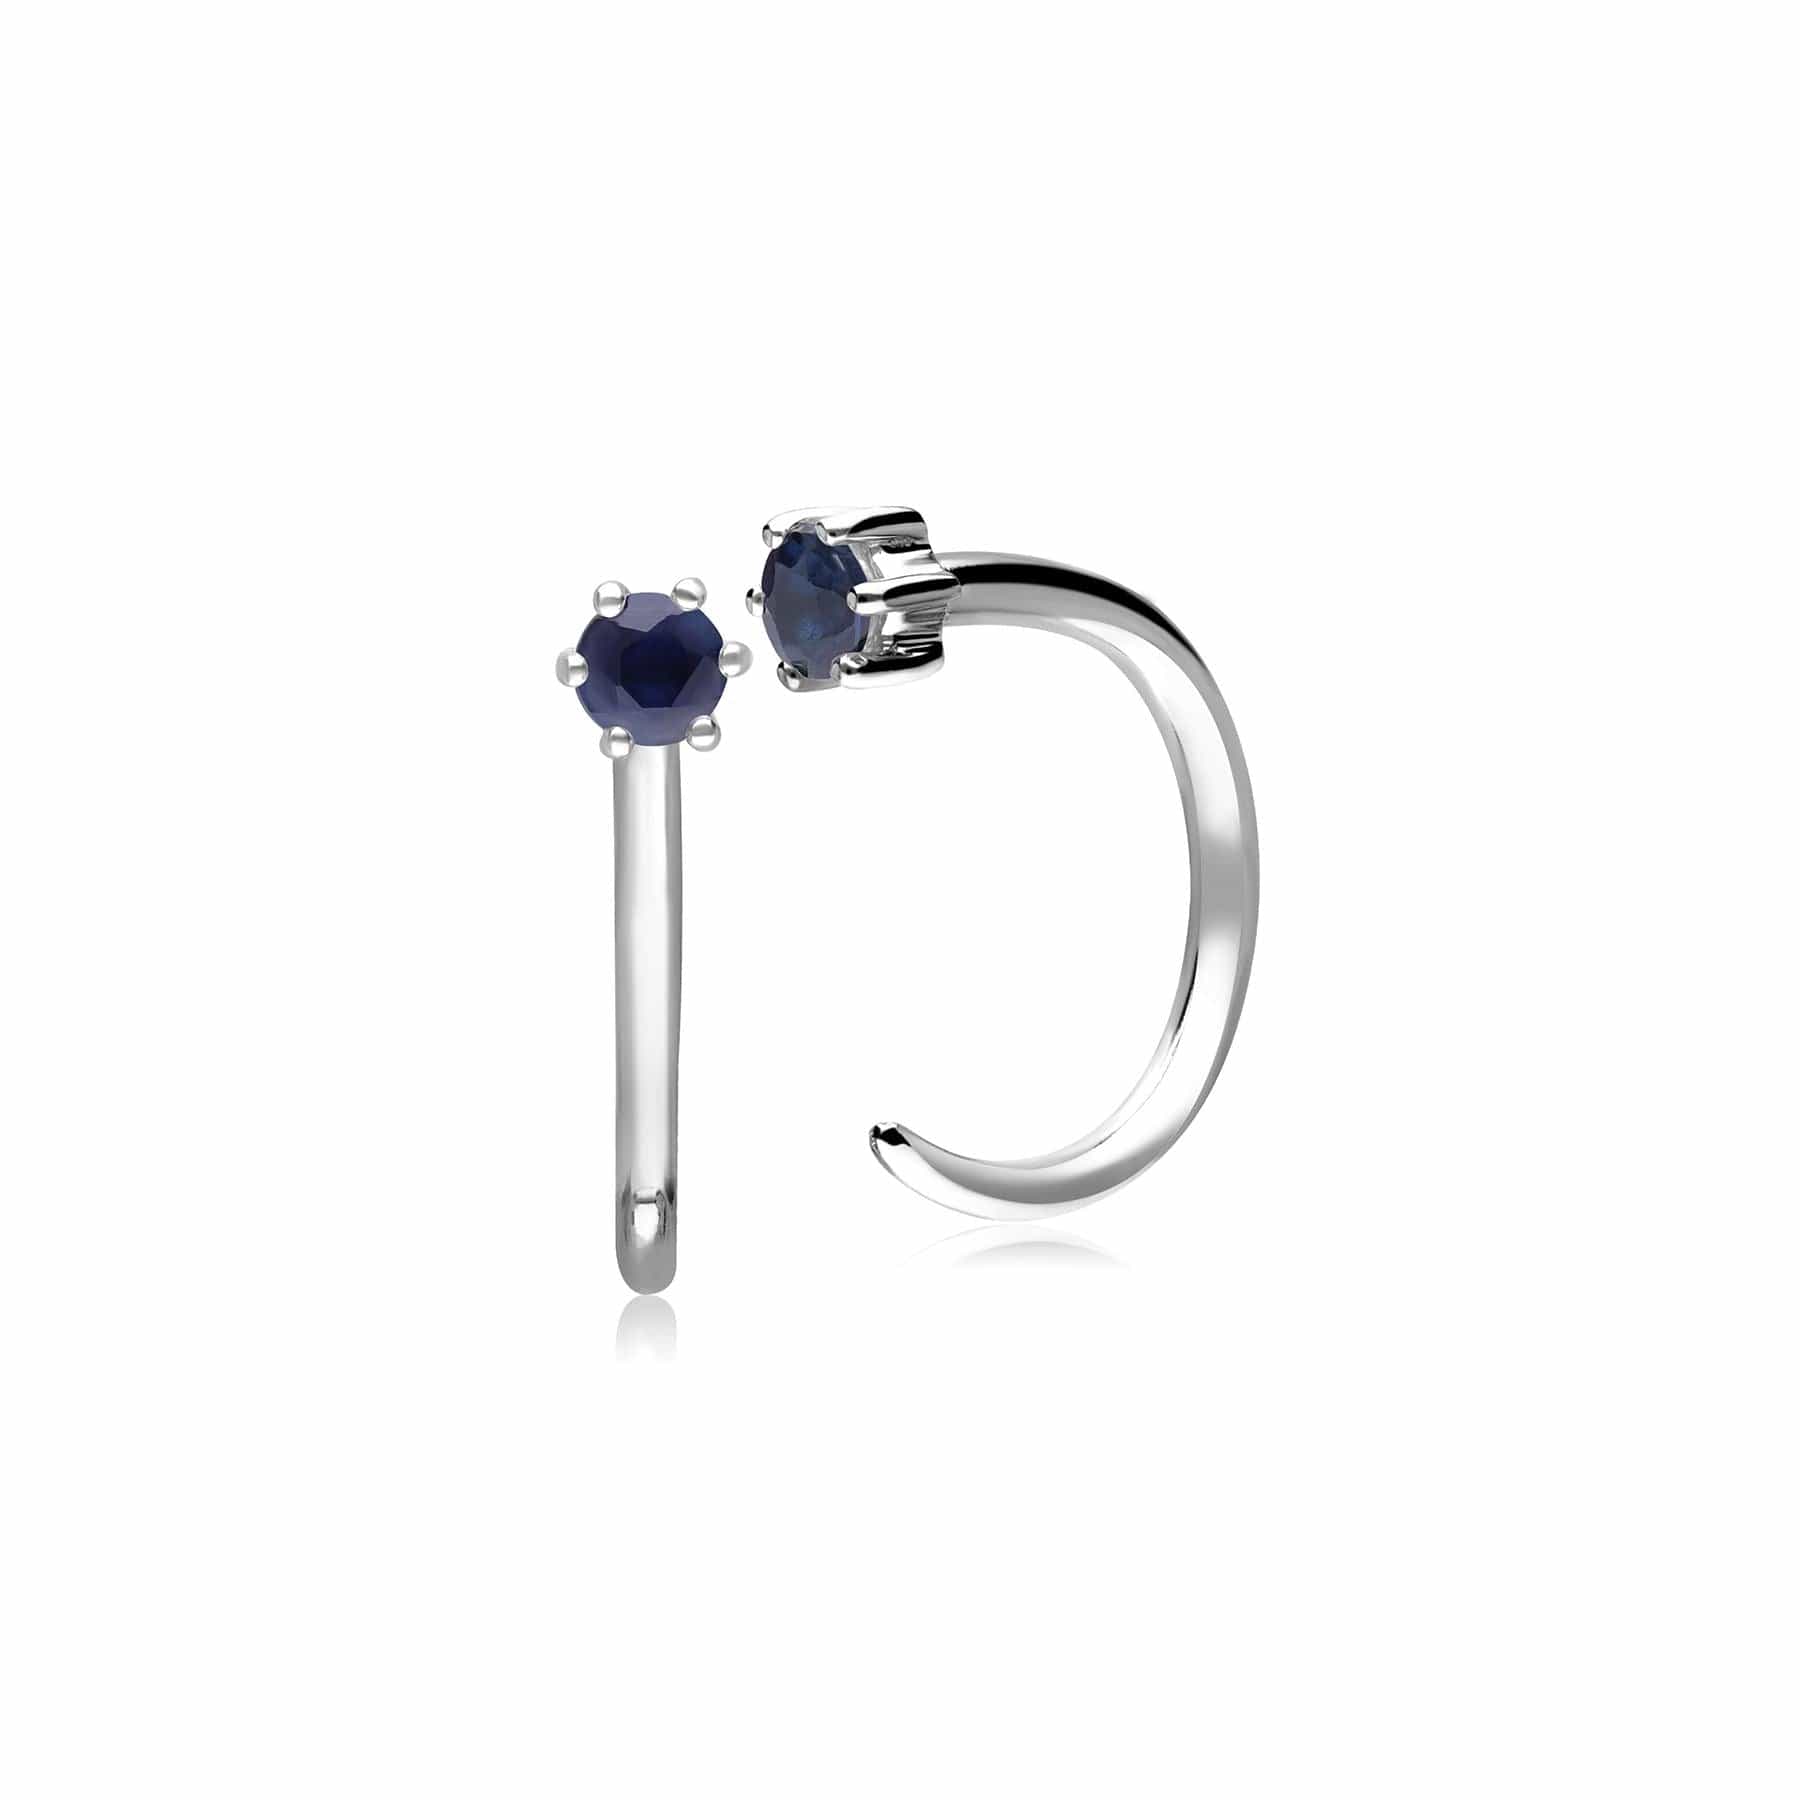 Sapphire Pull Through Hoop Earrings in 9ct White Gold